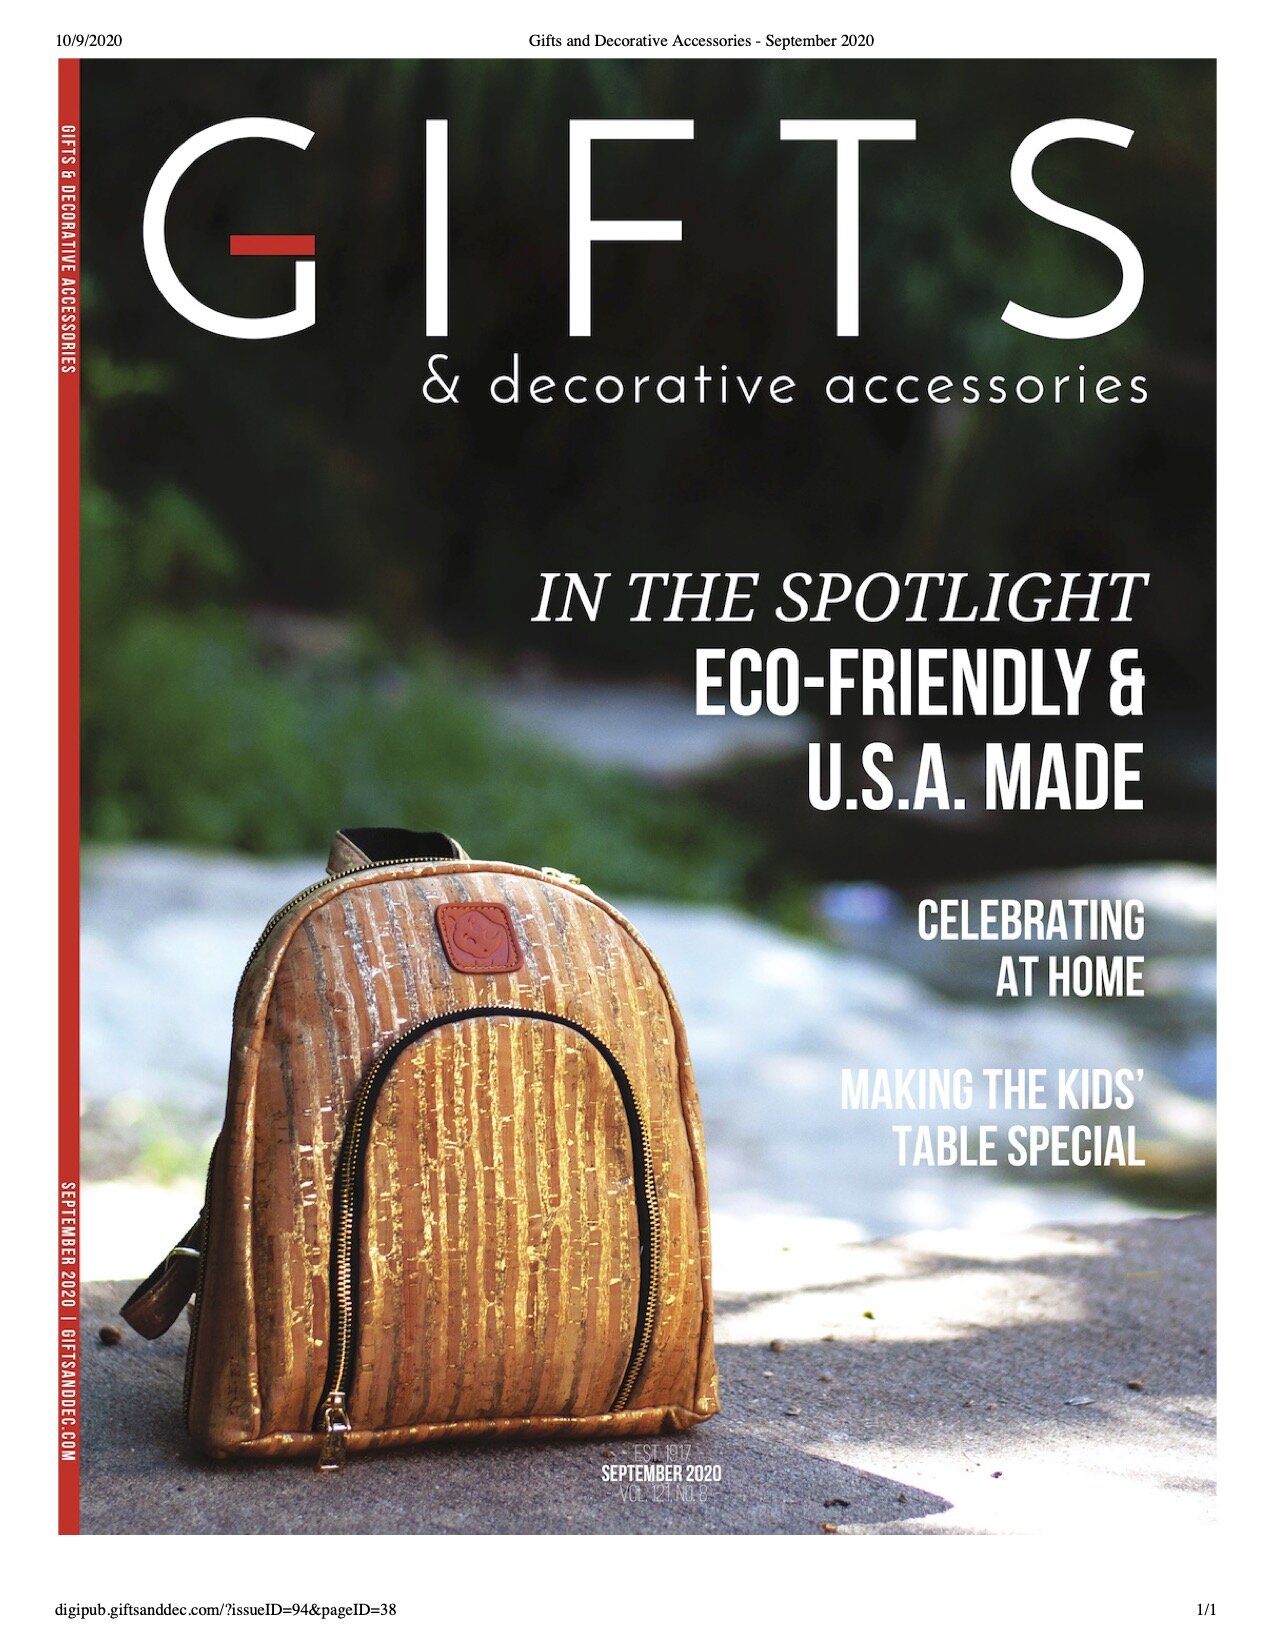 Gifts and Decorative Accessories - September 2020COVER.jpg